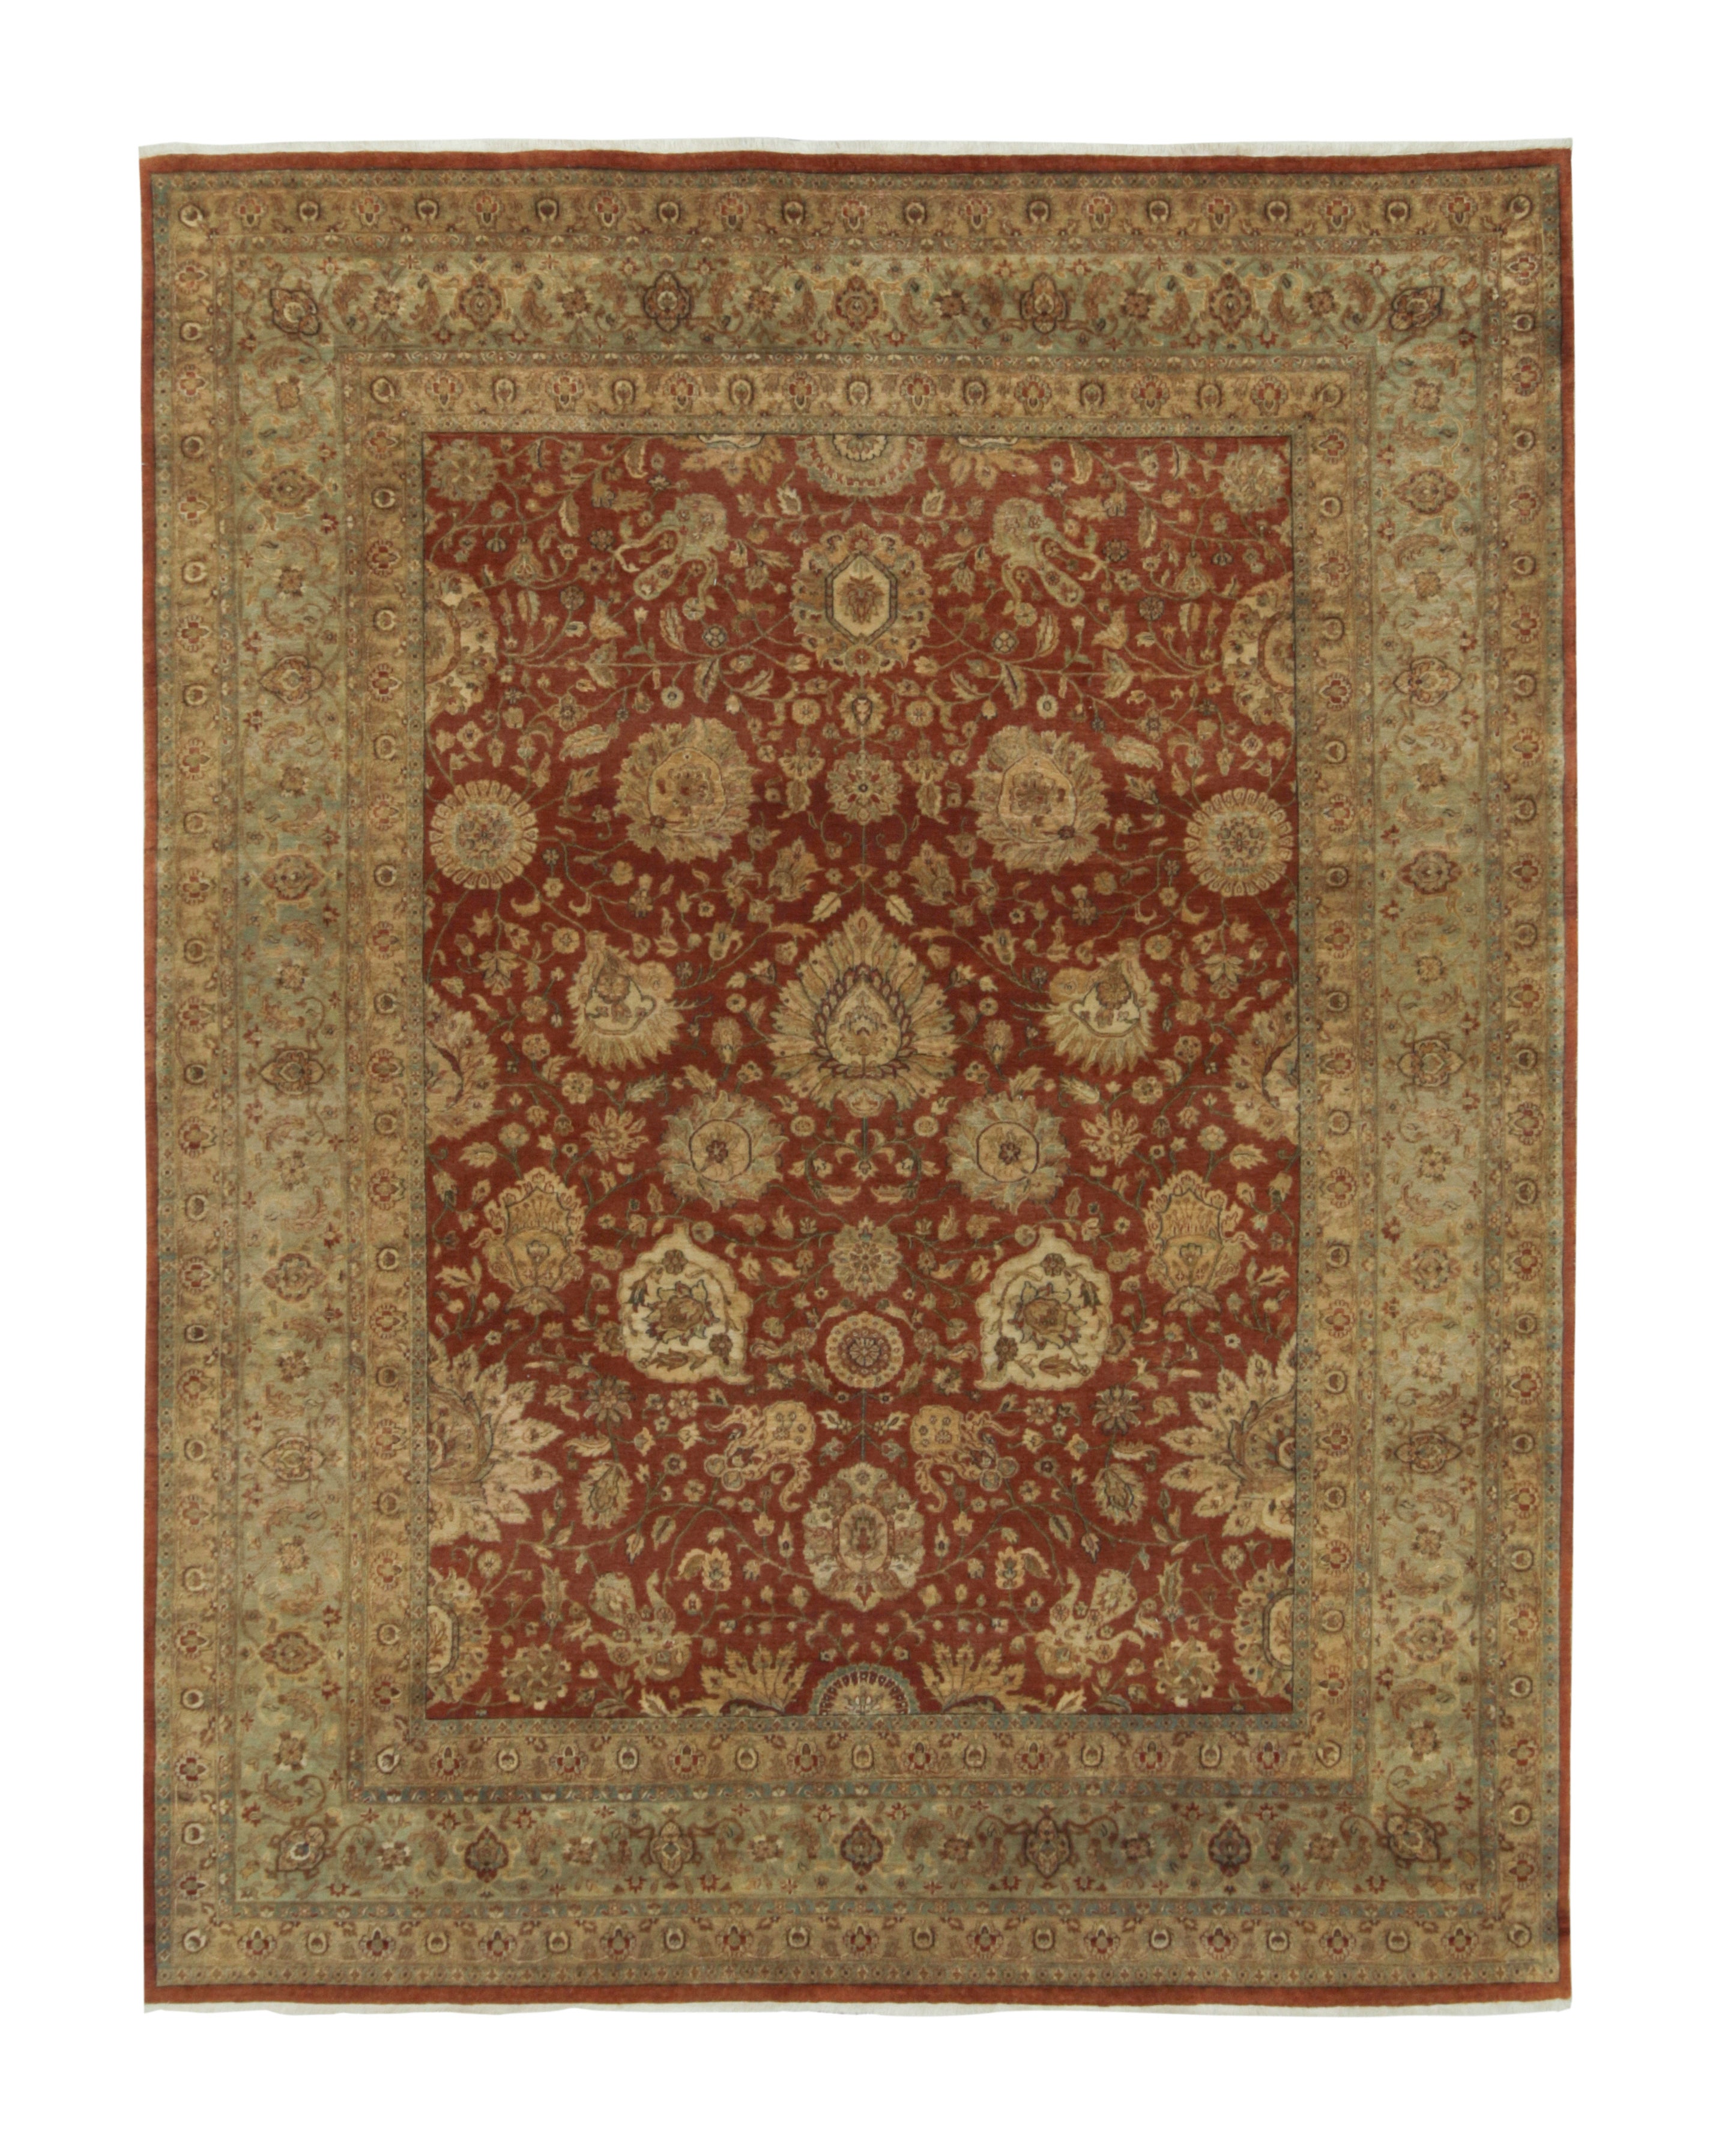 Rug & Kilim’s Persian Tabriz Style Rug in Red with Gold and Beige Floral Pattern